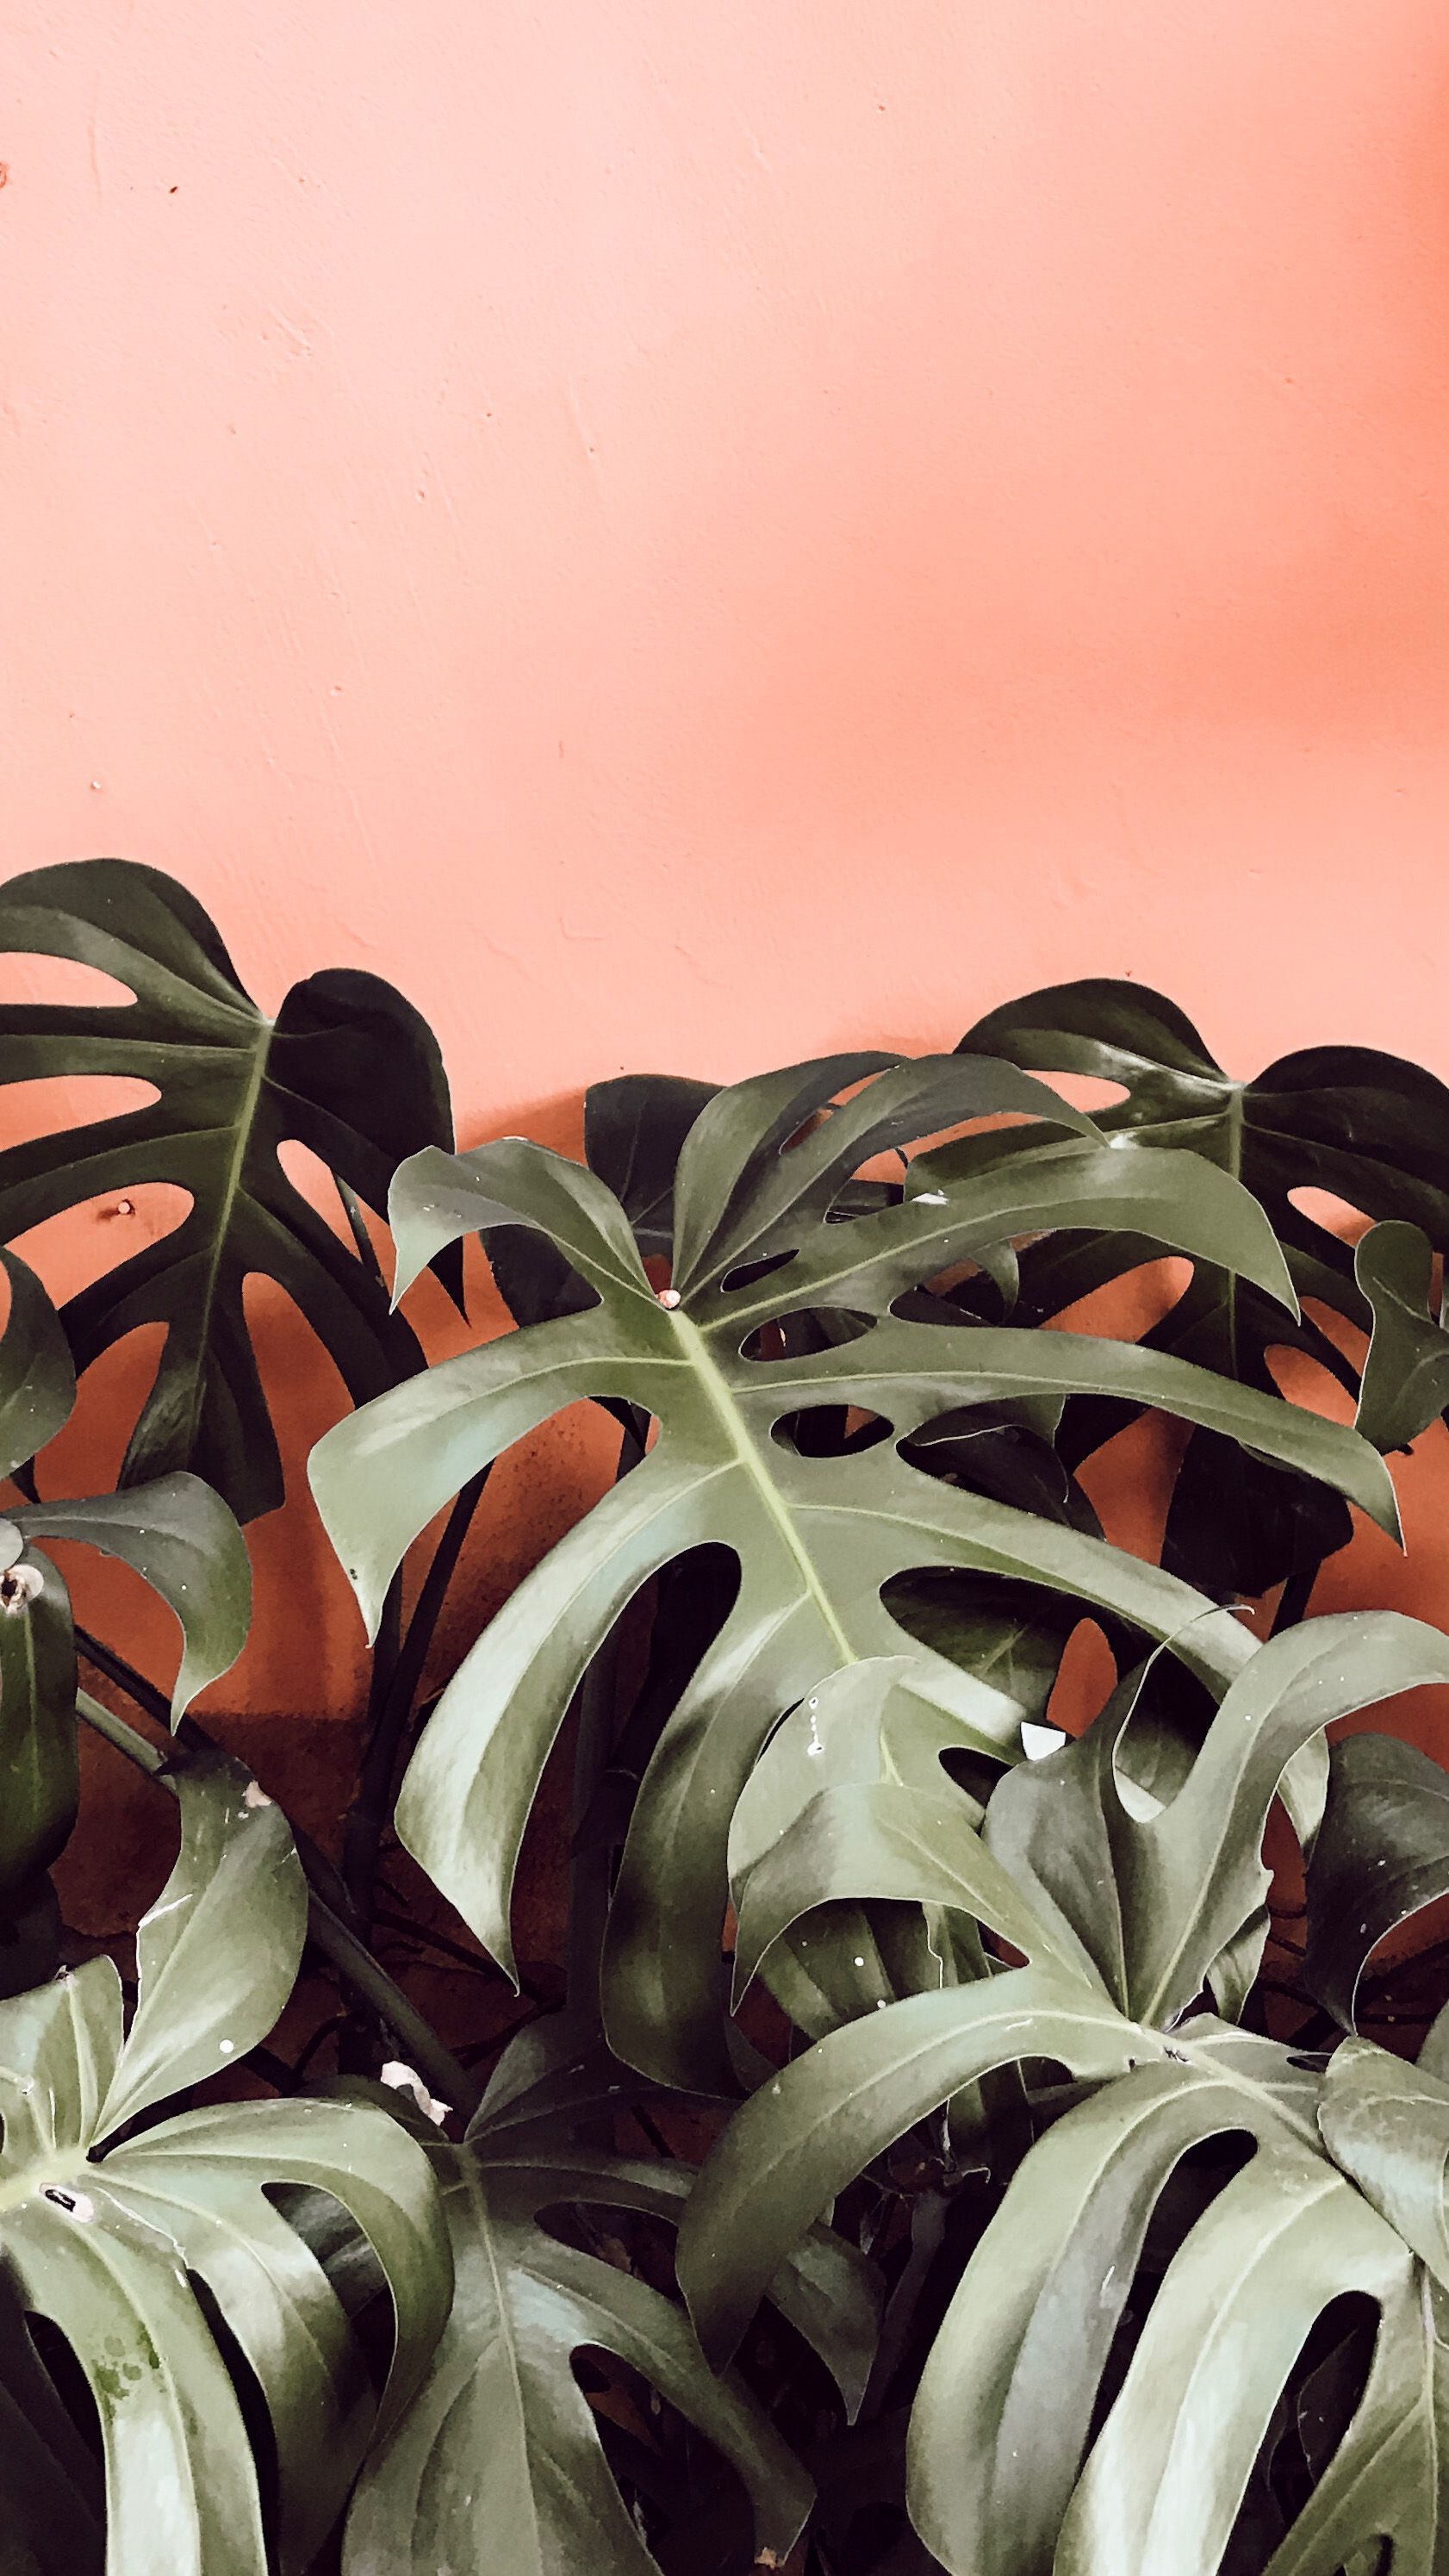 A plant sitting on top of some rocks - Monstera, coral, plants